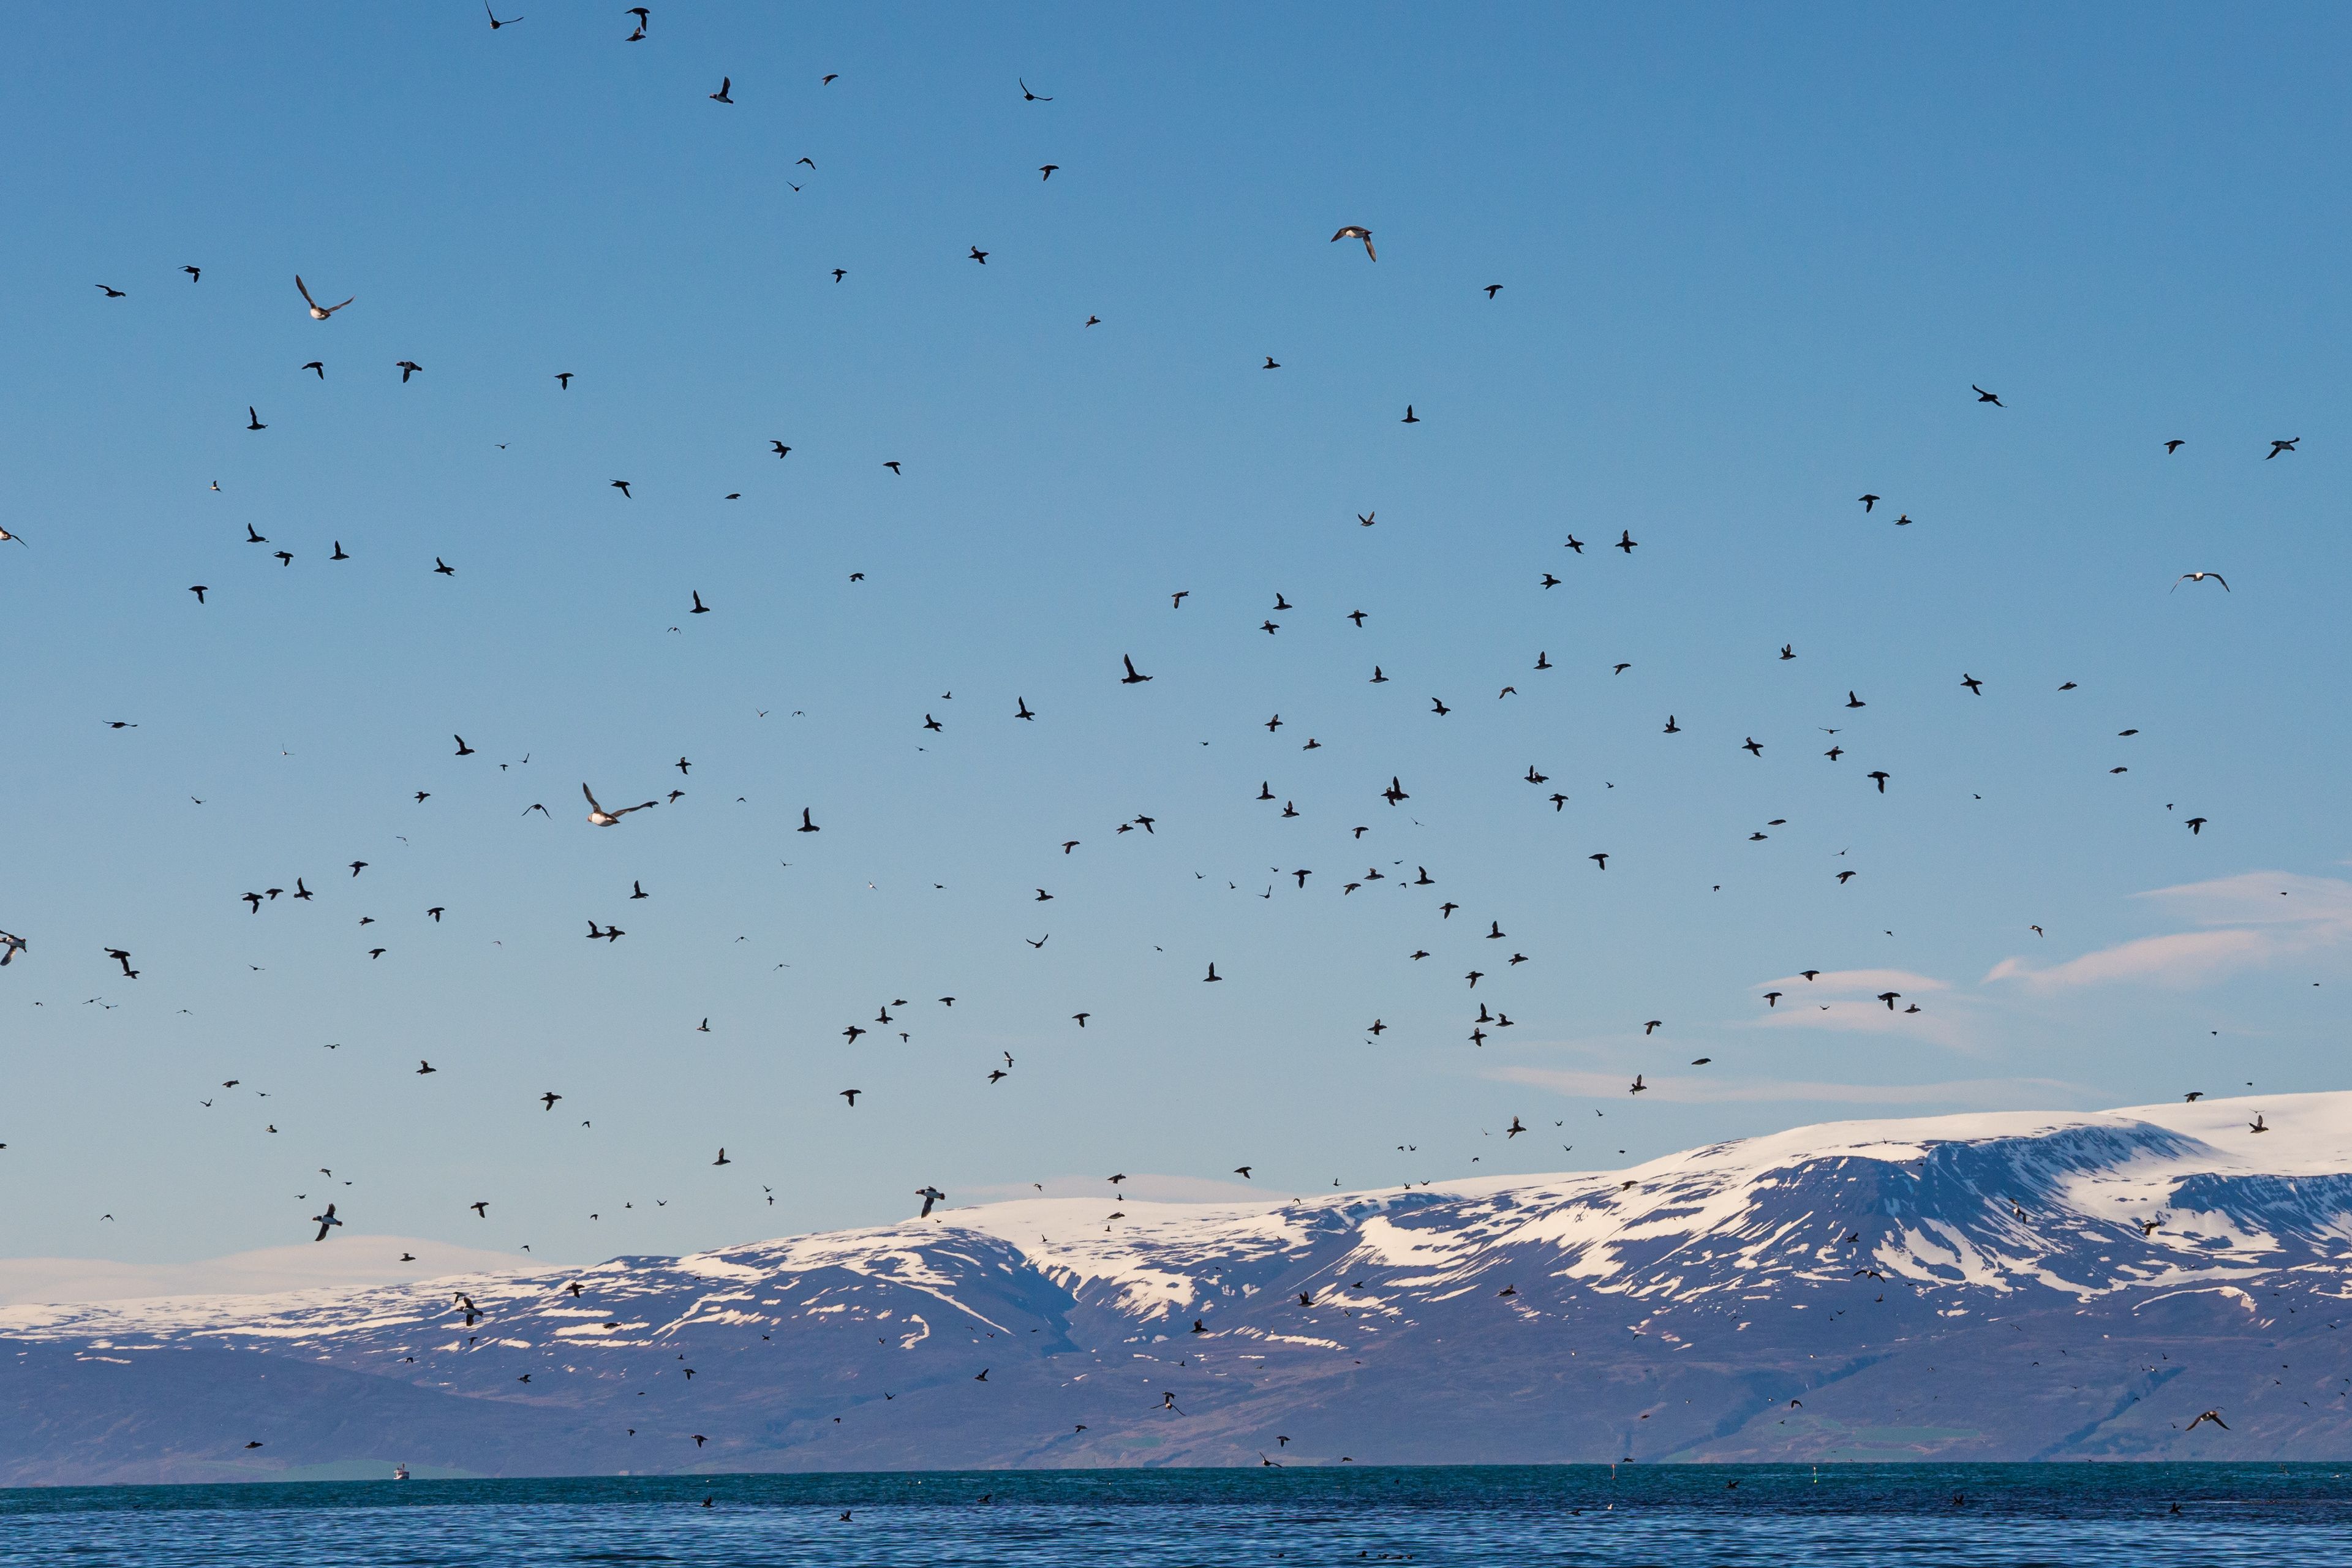 View on group of puffins flying around Lundey. You can see the ocean and the snow-capped mountains in the background.